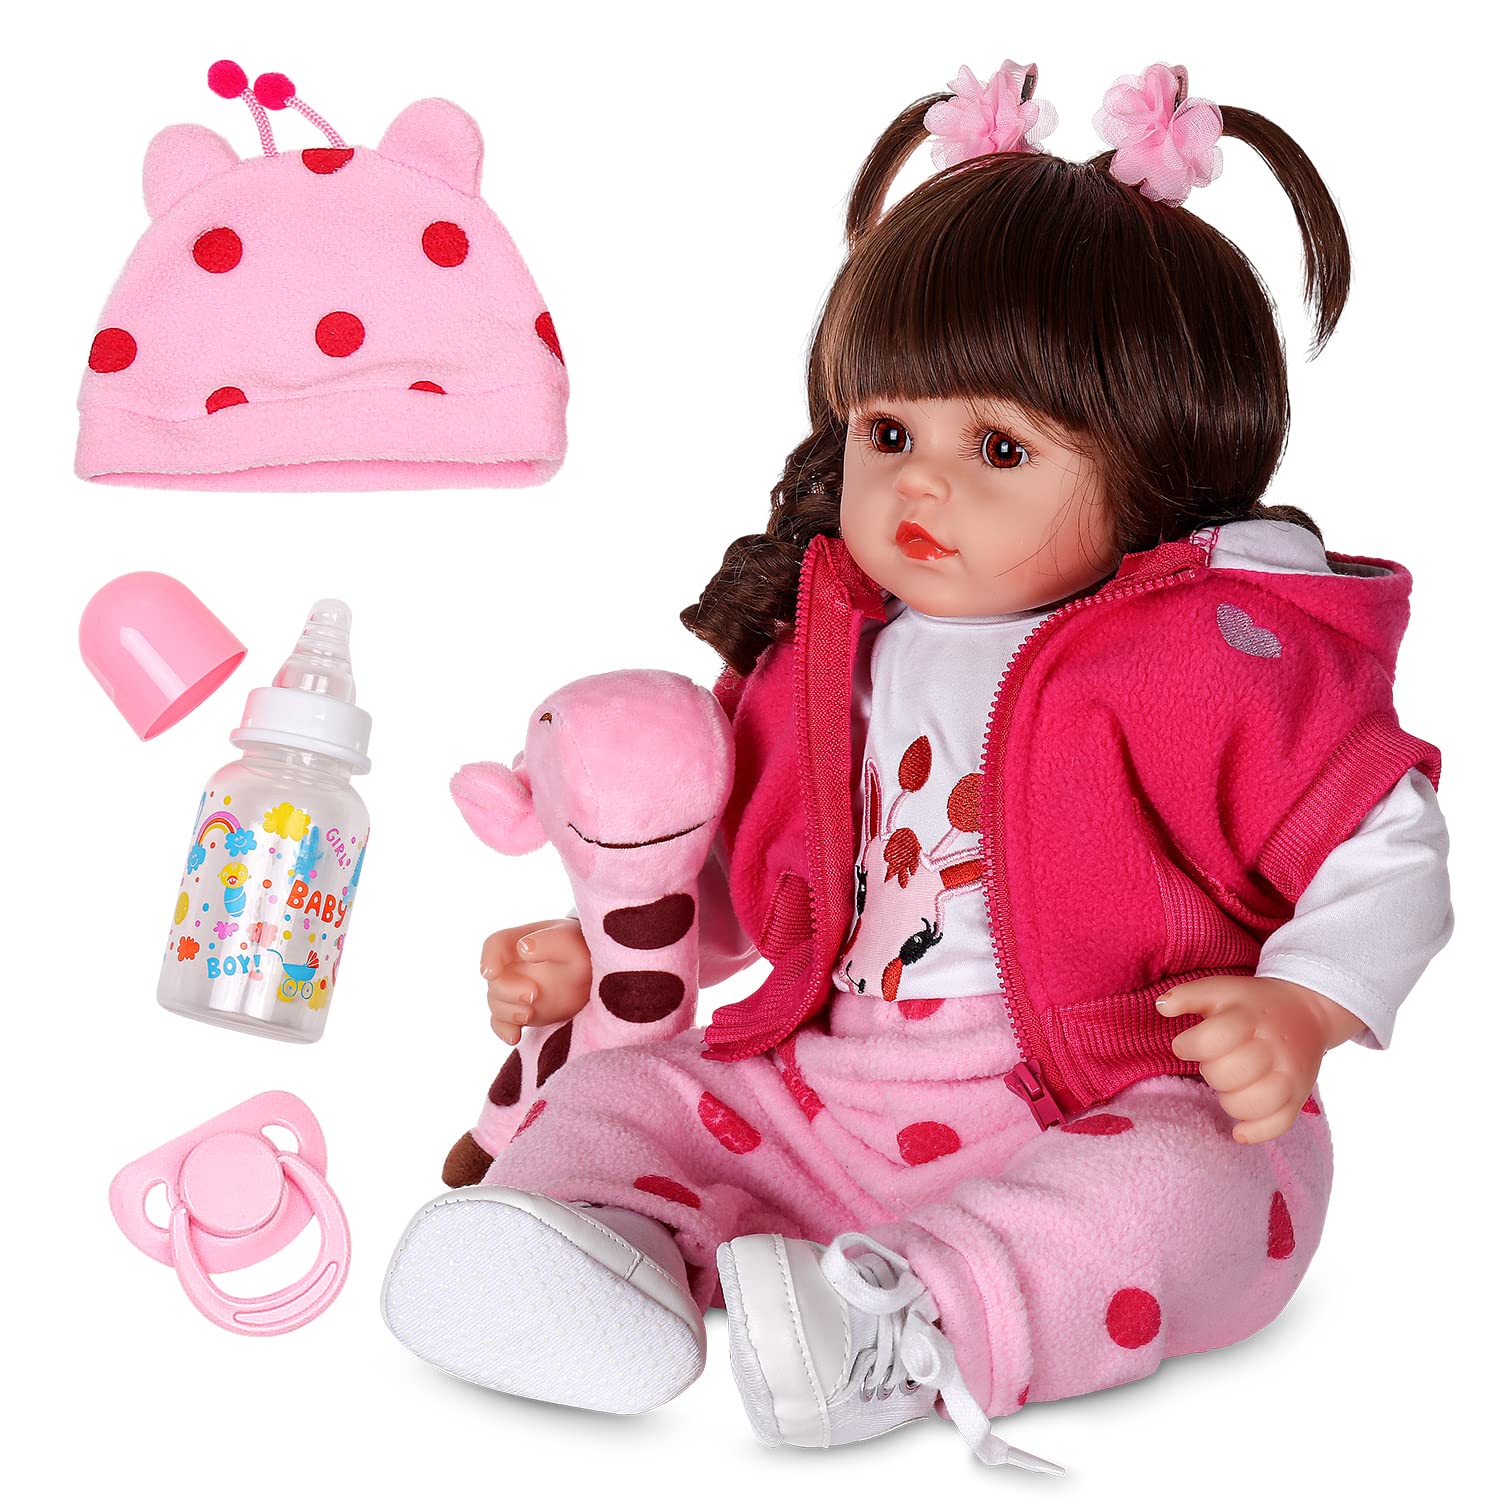 DOLLHOOD Reborn Baby Dolls - 18-Inch Realistic Baby Doll with Complete Baby Doll Accessories - Lifelike, Soft Newborn Girl Doll with 360° Movable Arms and Legs. Includes Birth Certificate